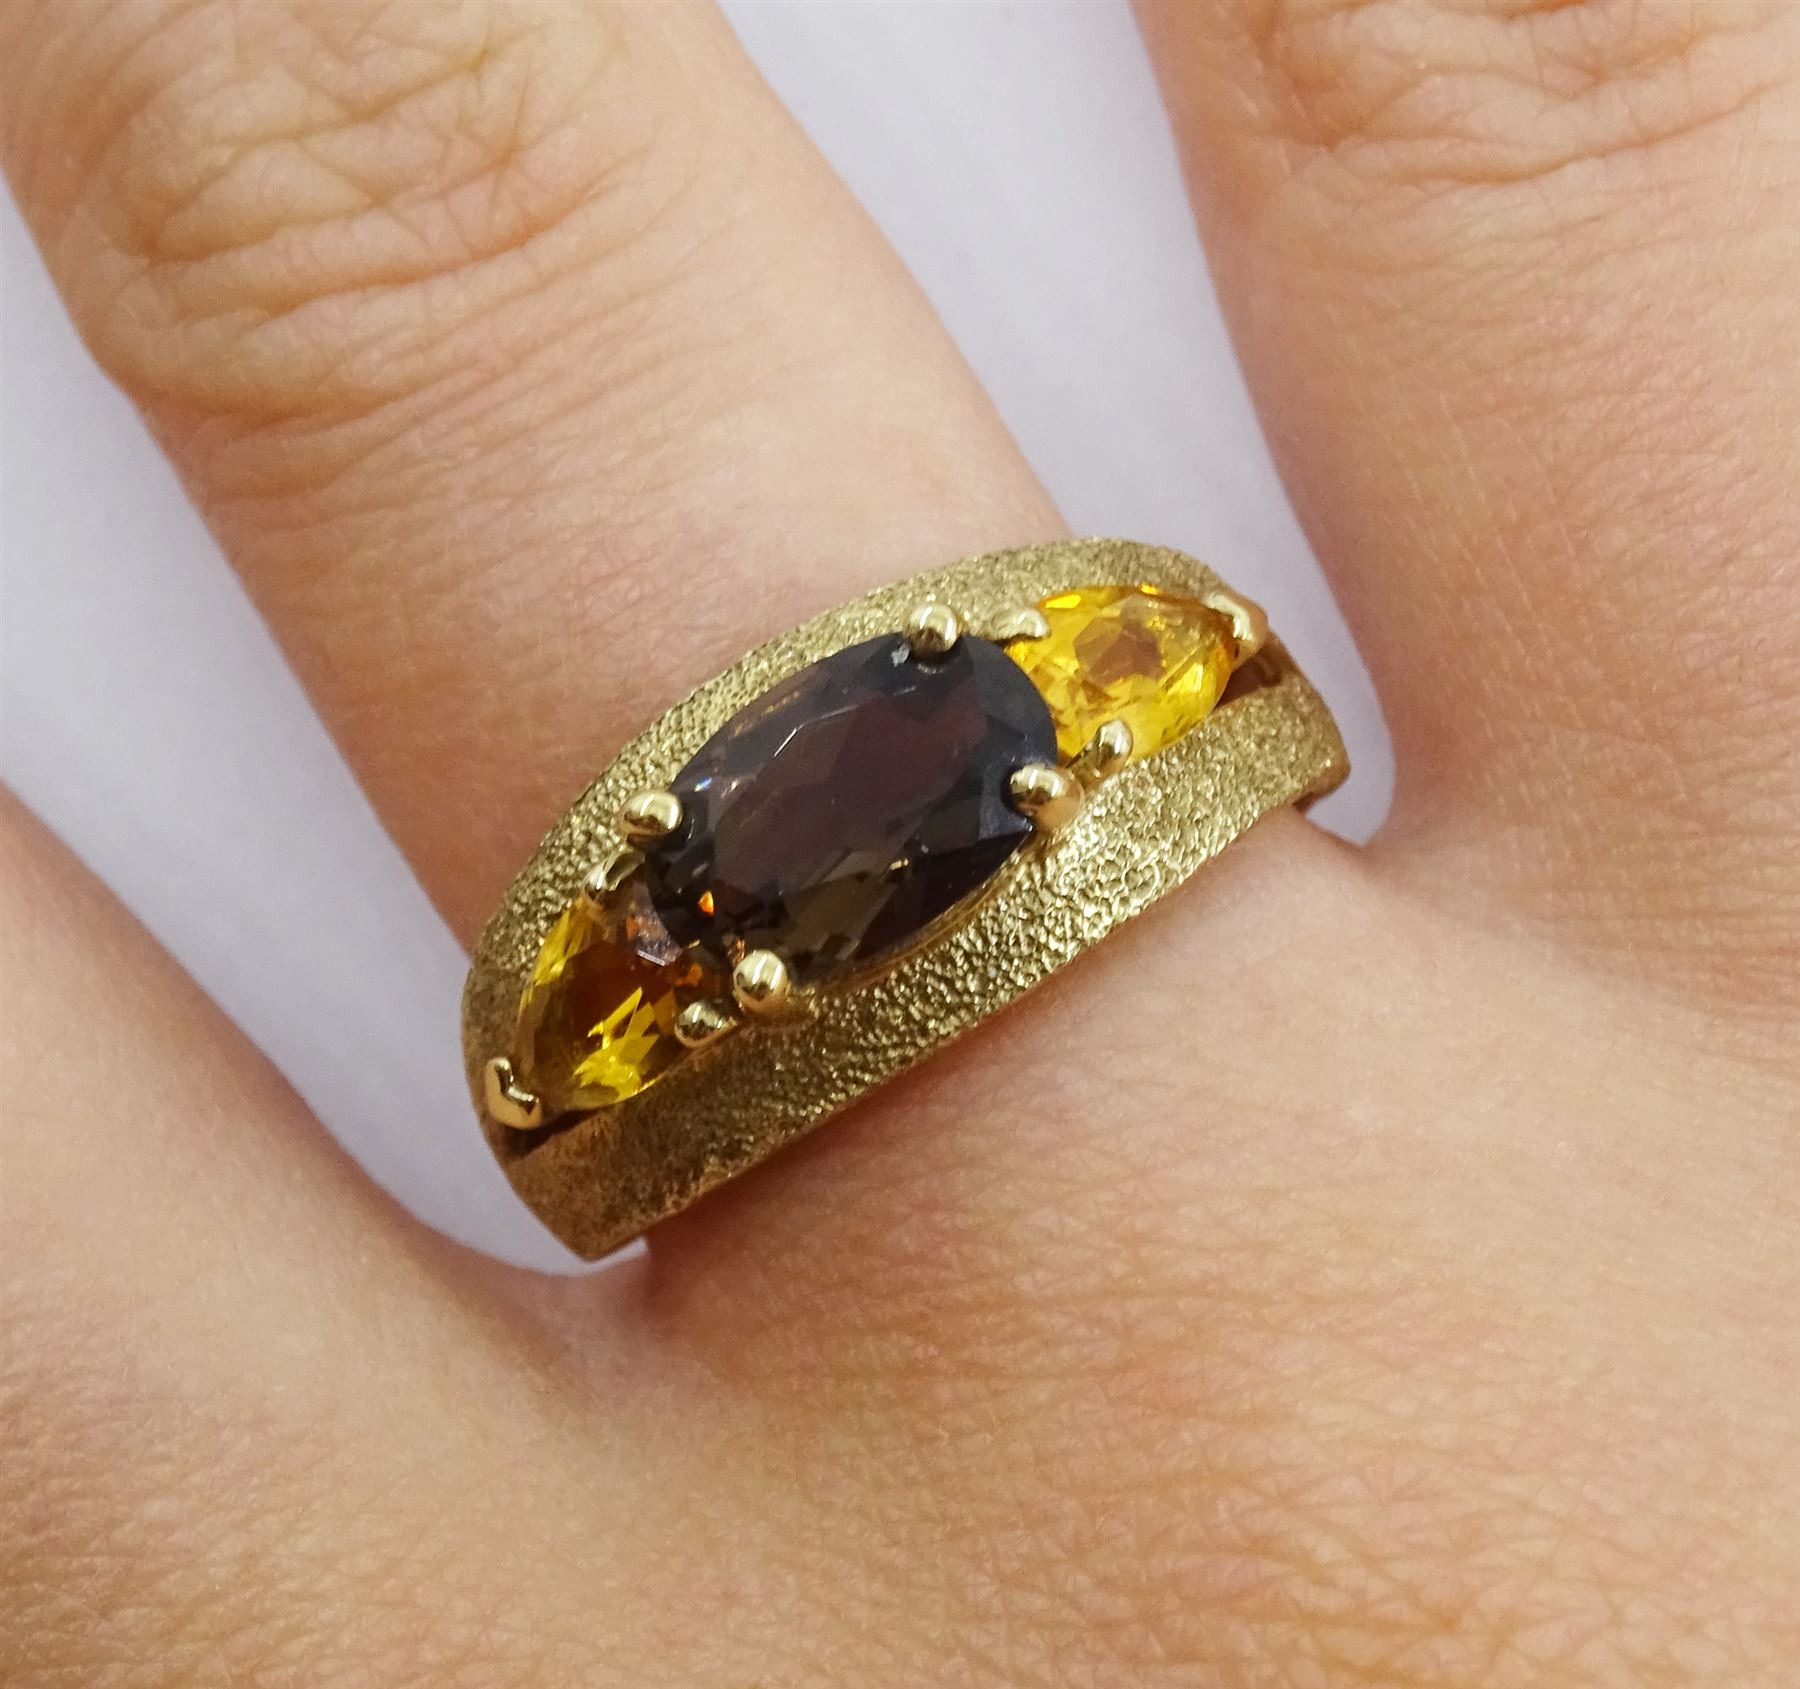 9ct gold three stone oval smoky quartz and pear shaped citrine ring - Image 2 of 4